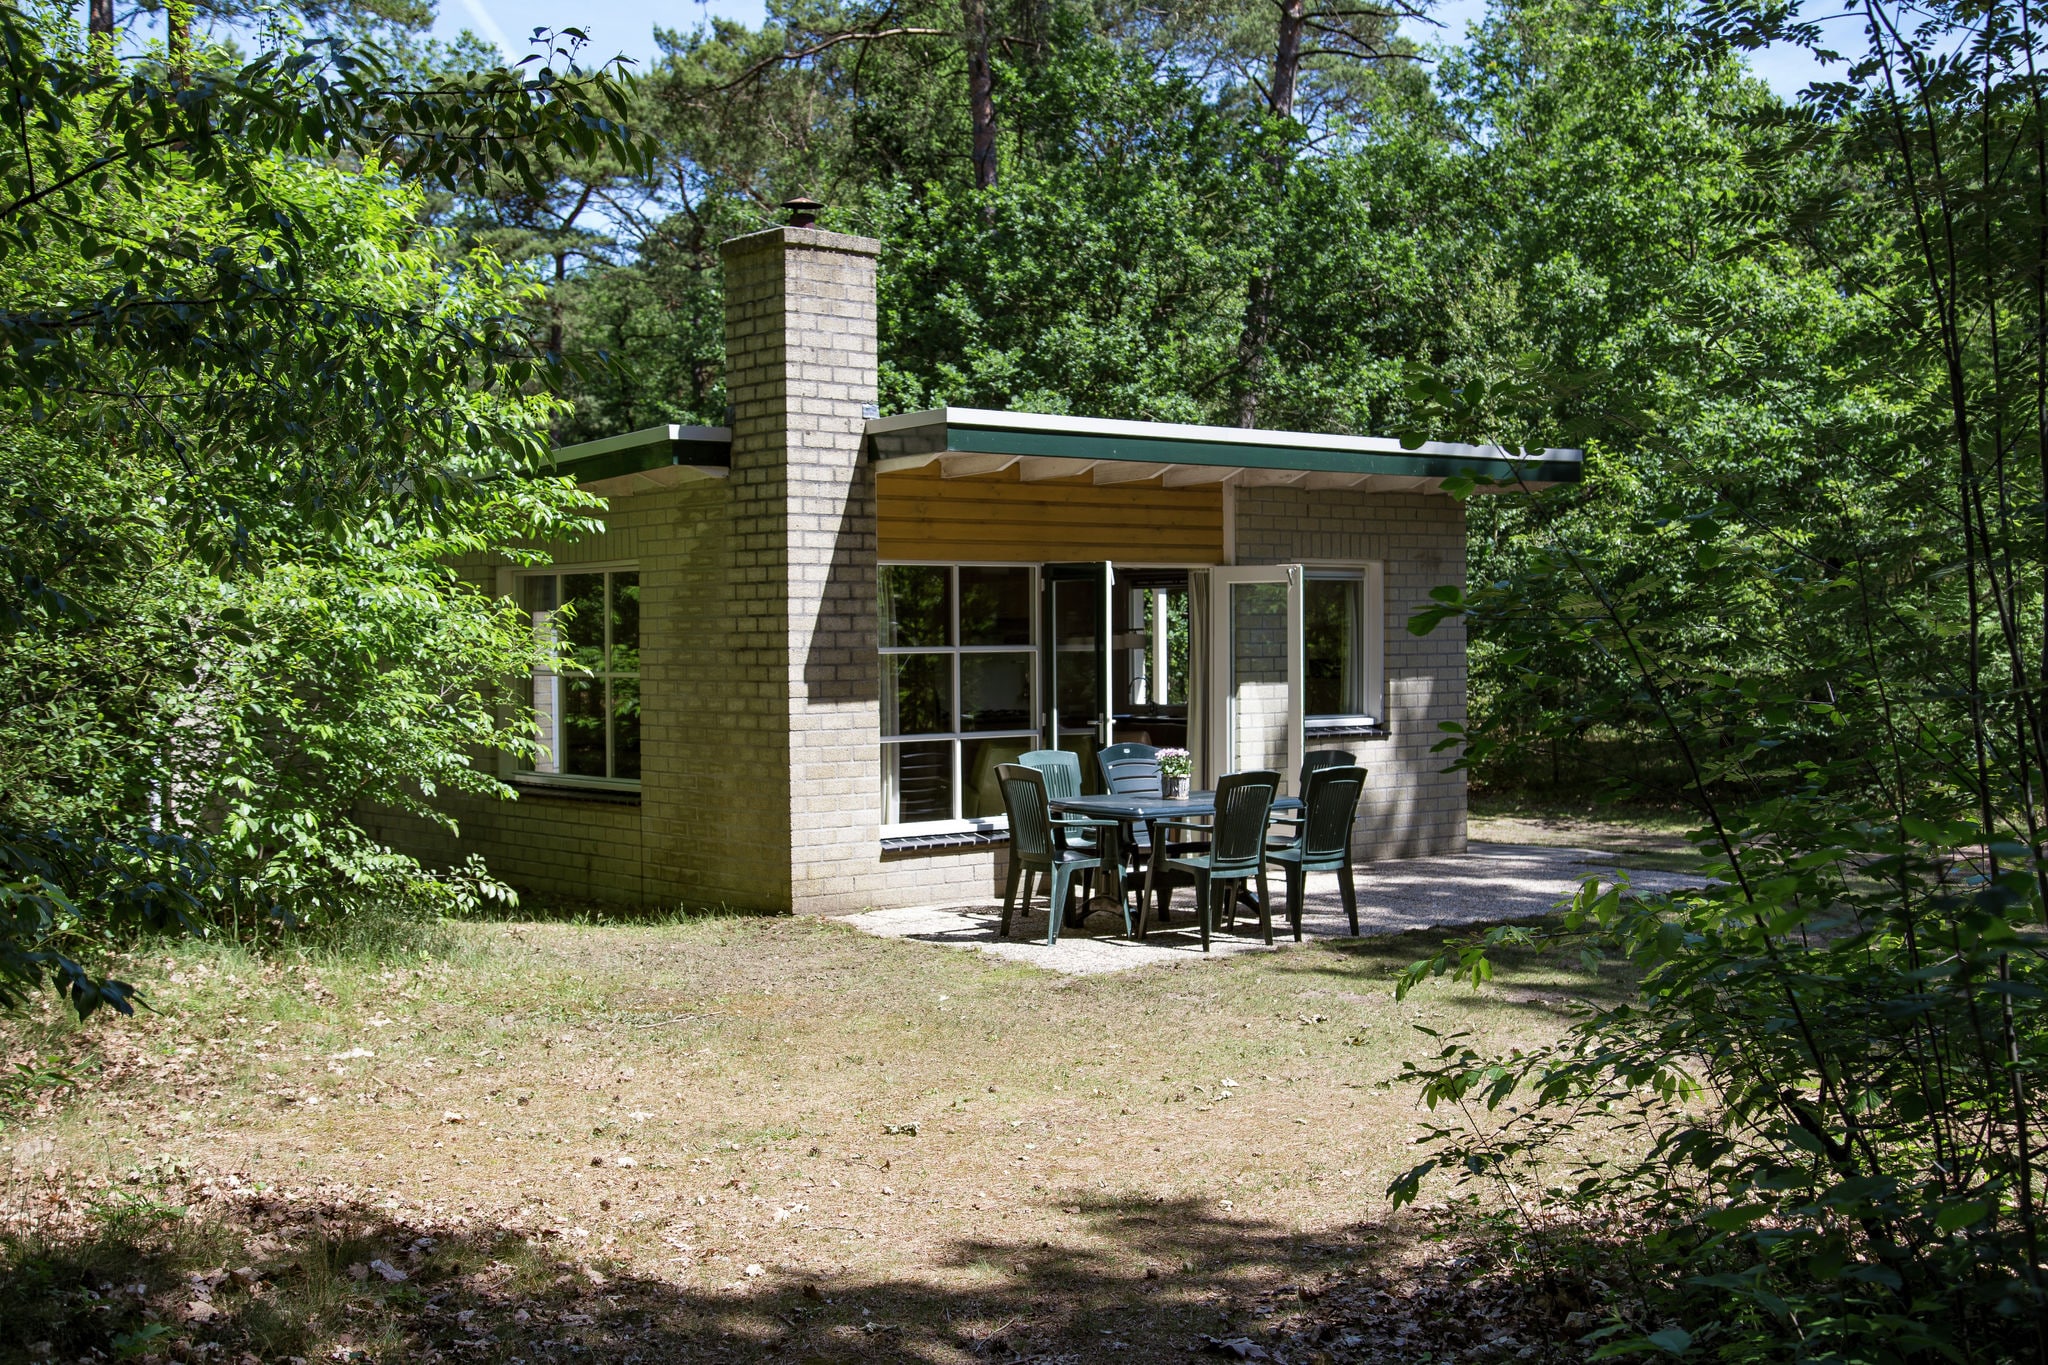 Bungalow withwood stove, near Assen